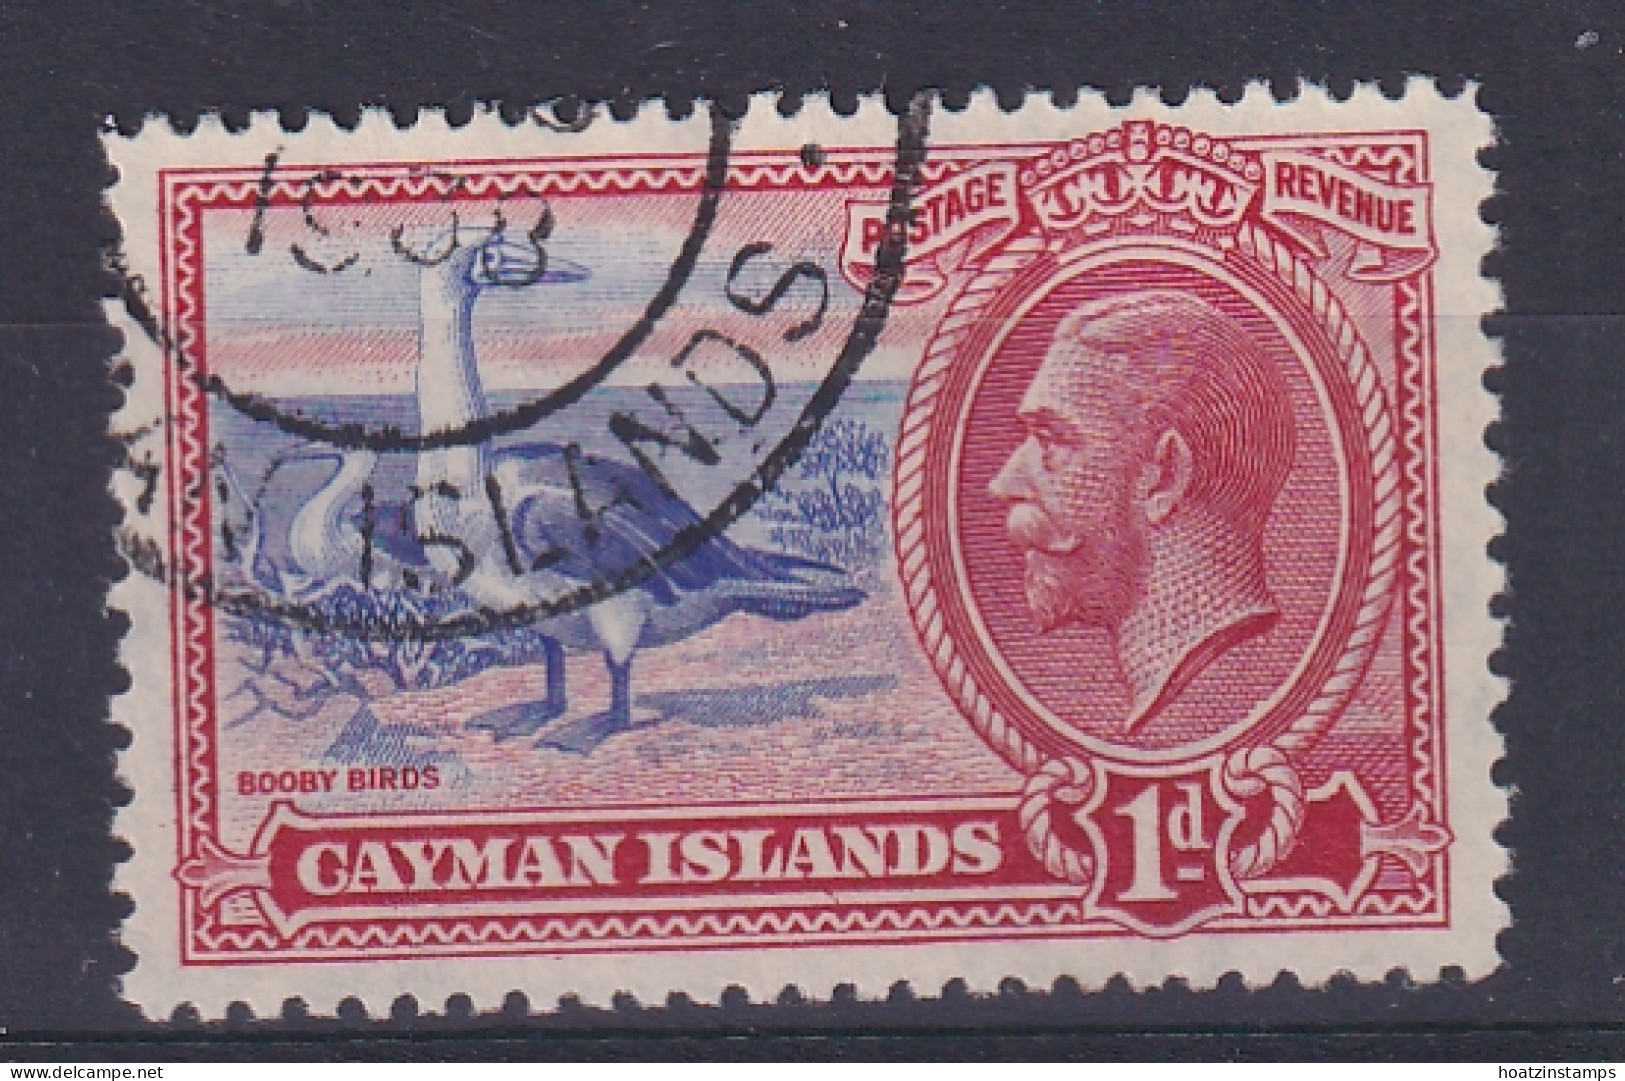 Cayman Islands: 1935   KGV - Pictorial   SG98   1d     Used - Cayman Islands